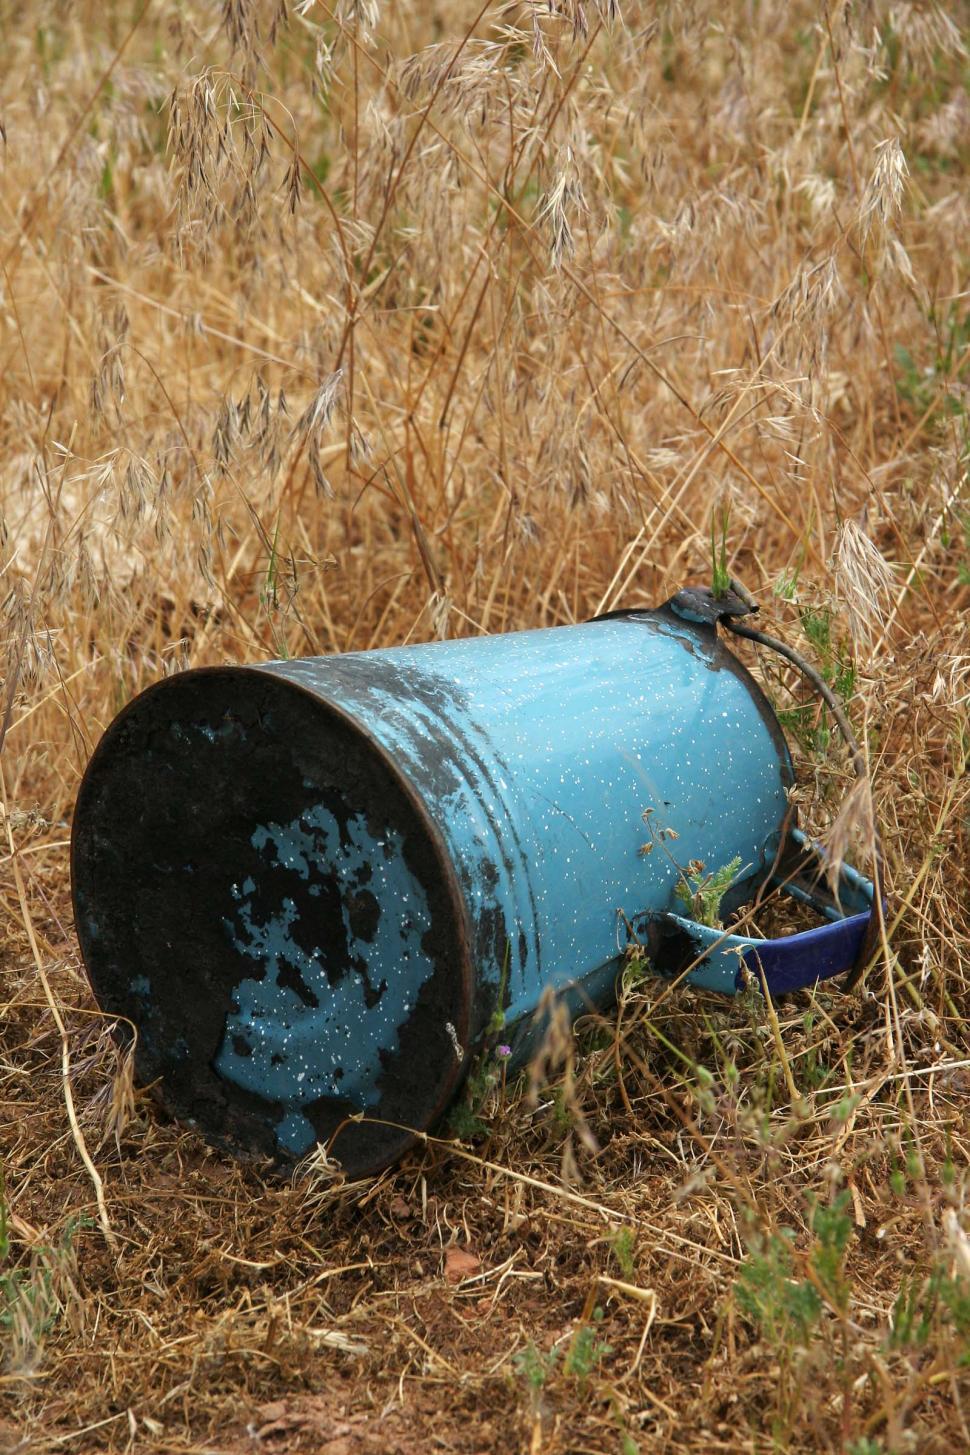 Free Image of grasses grass dried dead weeds camp camping kettle teapot enamel blue trash garbage waste litter 